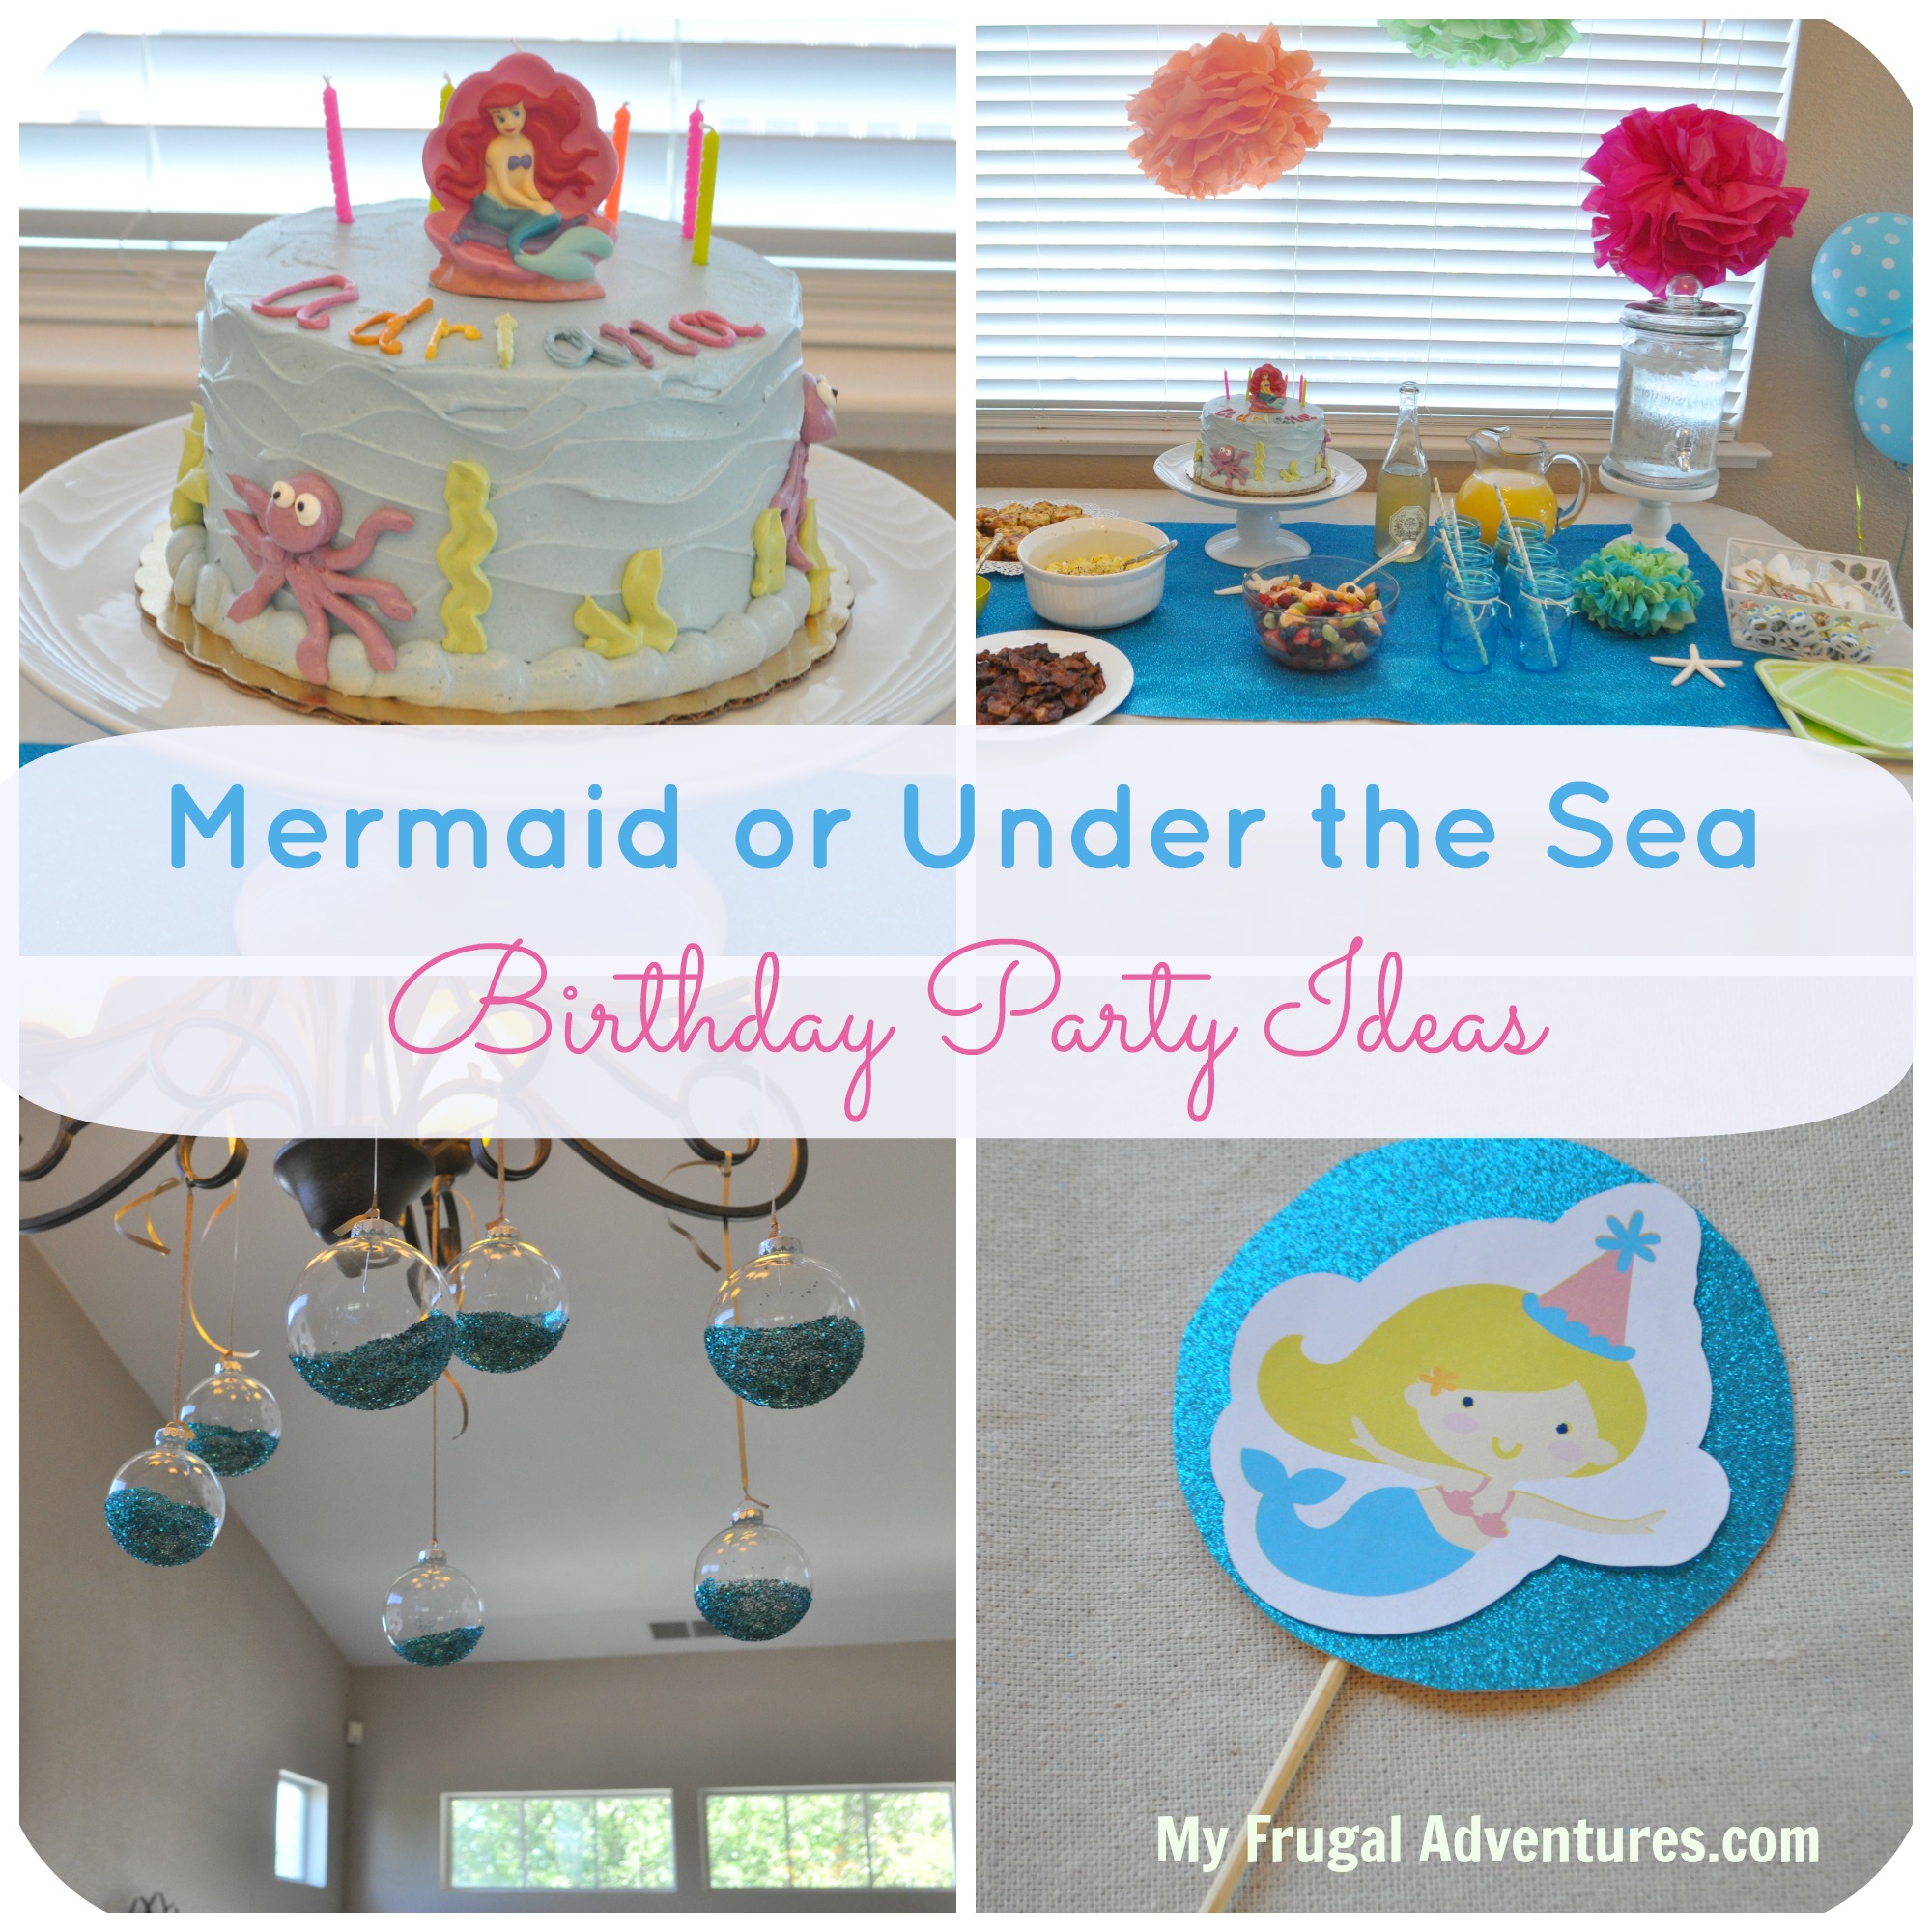 Mermaid or Under the Sea Party Ideas & Inspiration - My Frugal Adventures